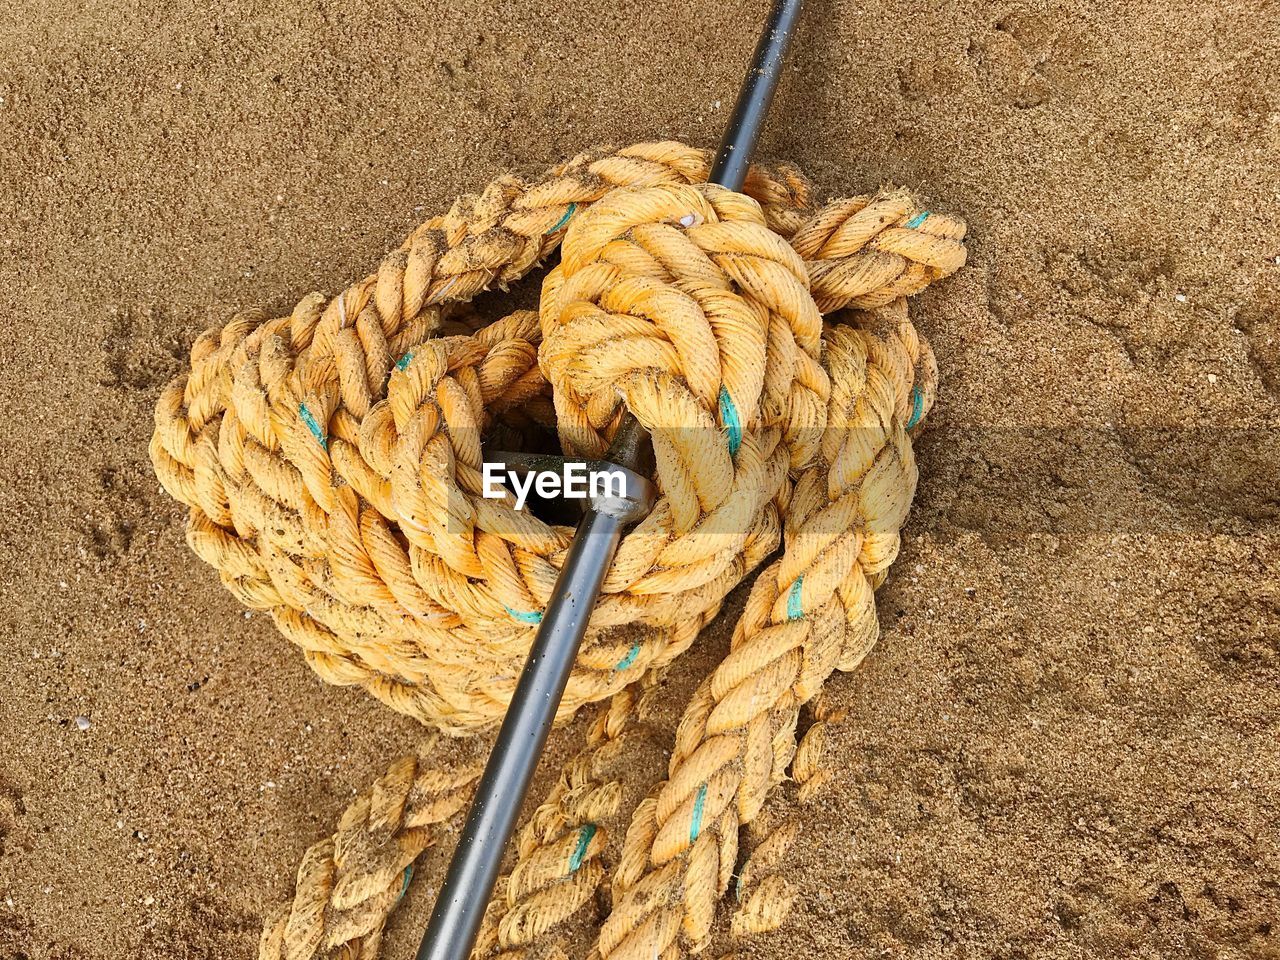 High angle view of rope tied on wood